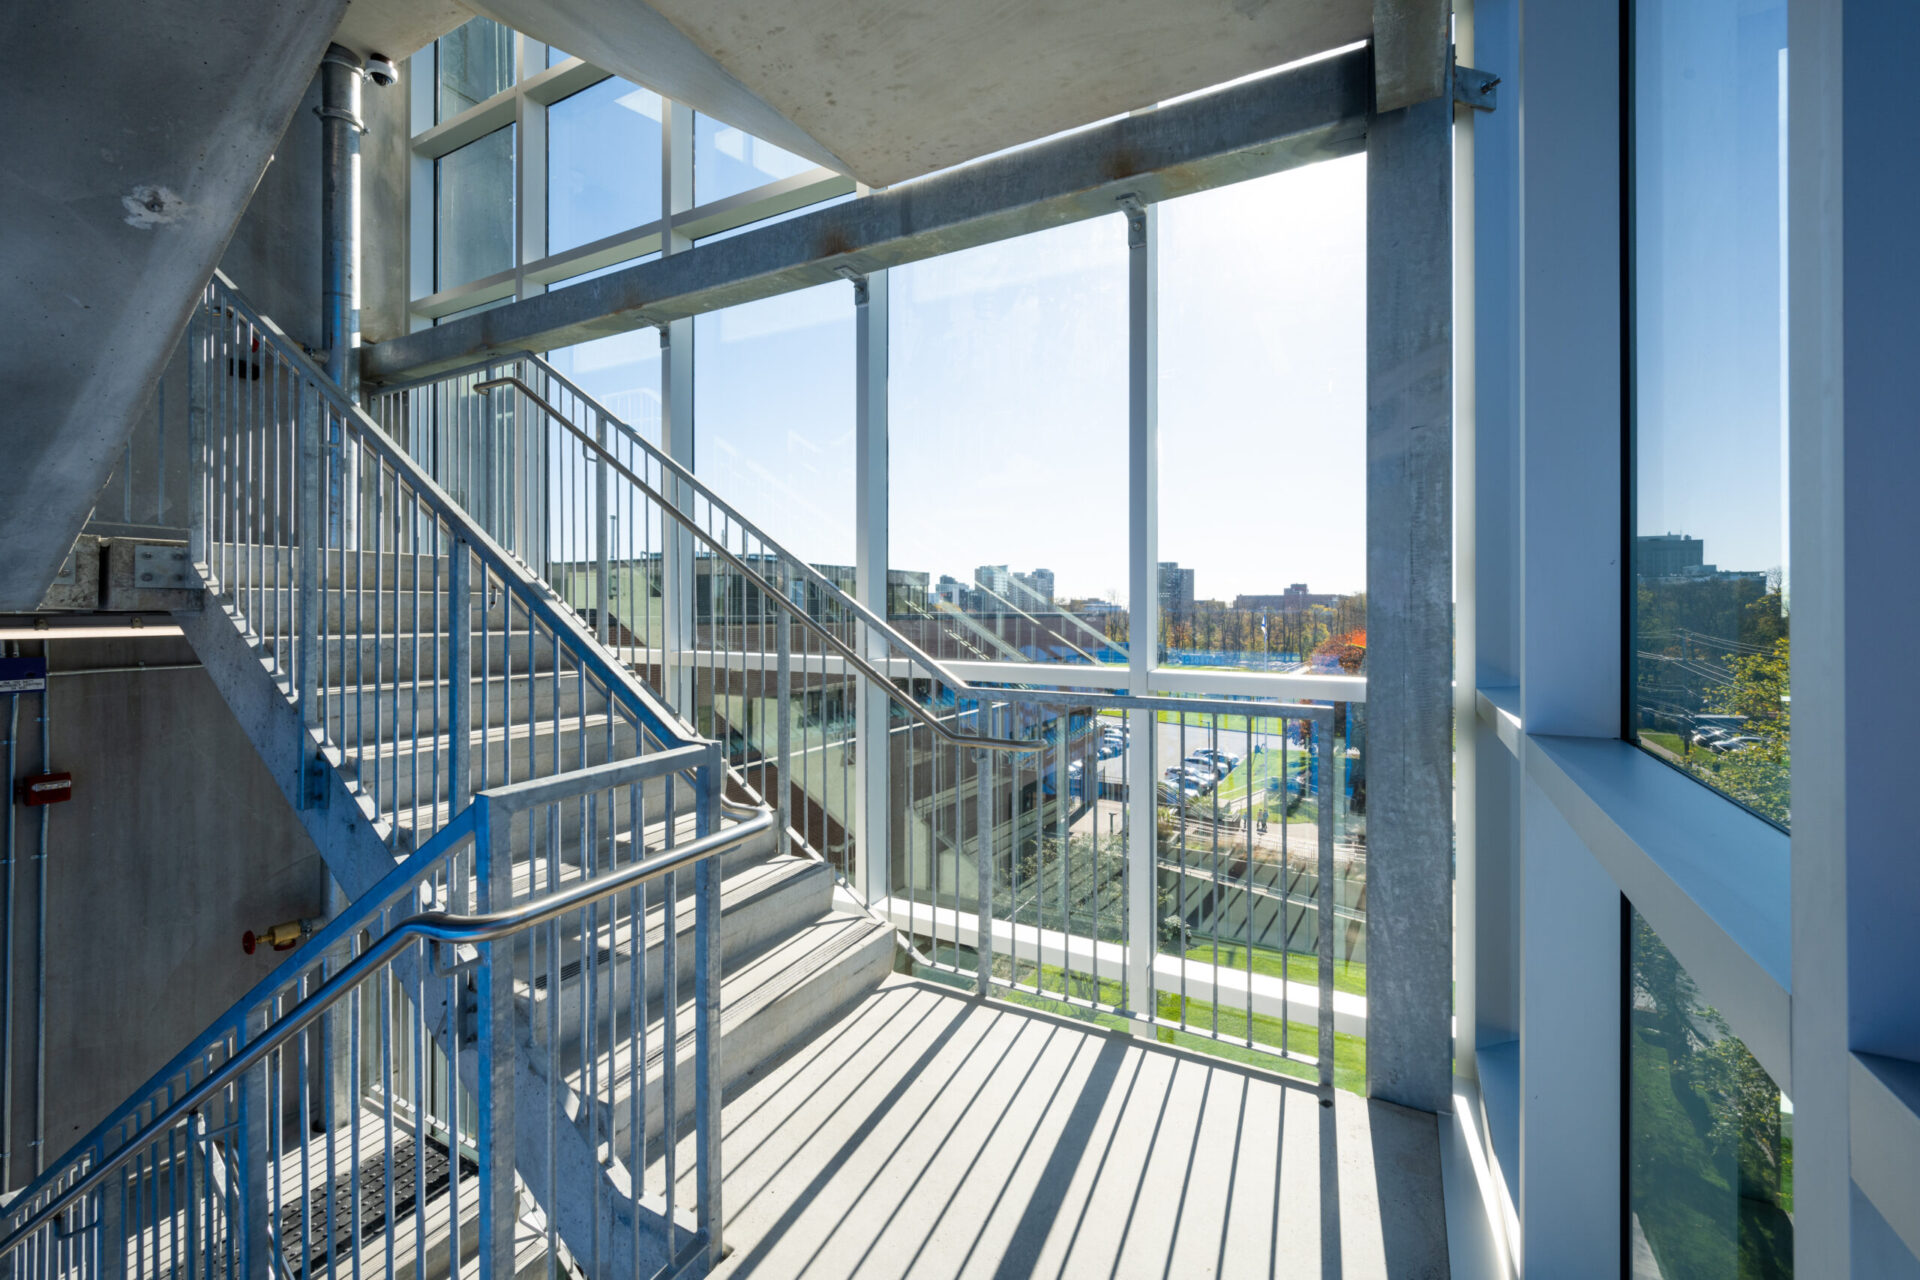 The metal stairs display a blend of engineering and architectural excellence.